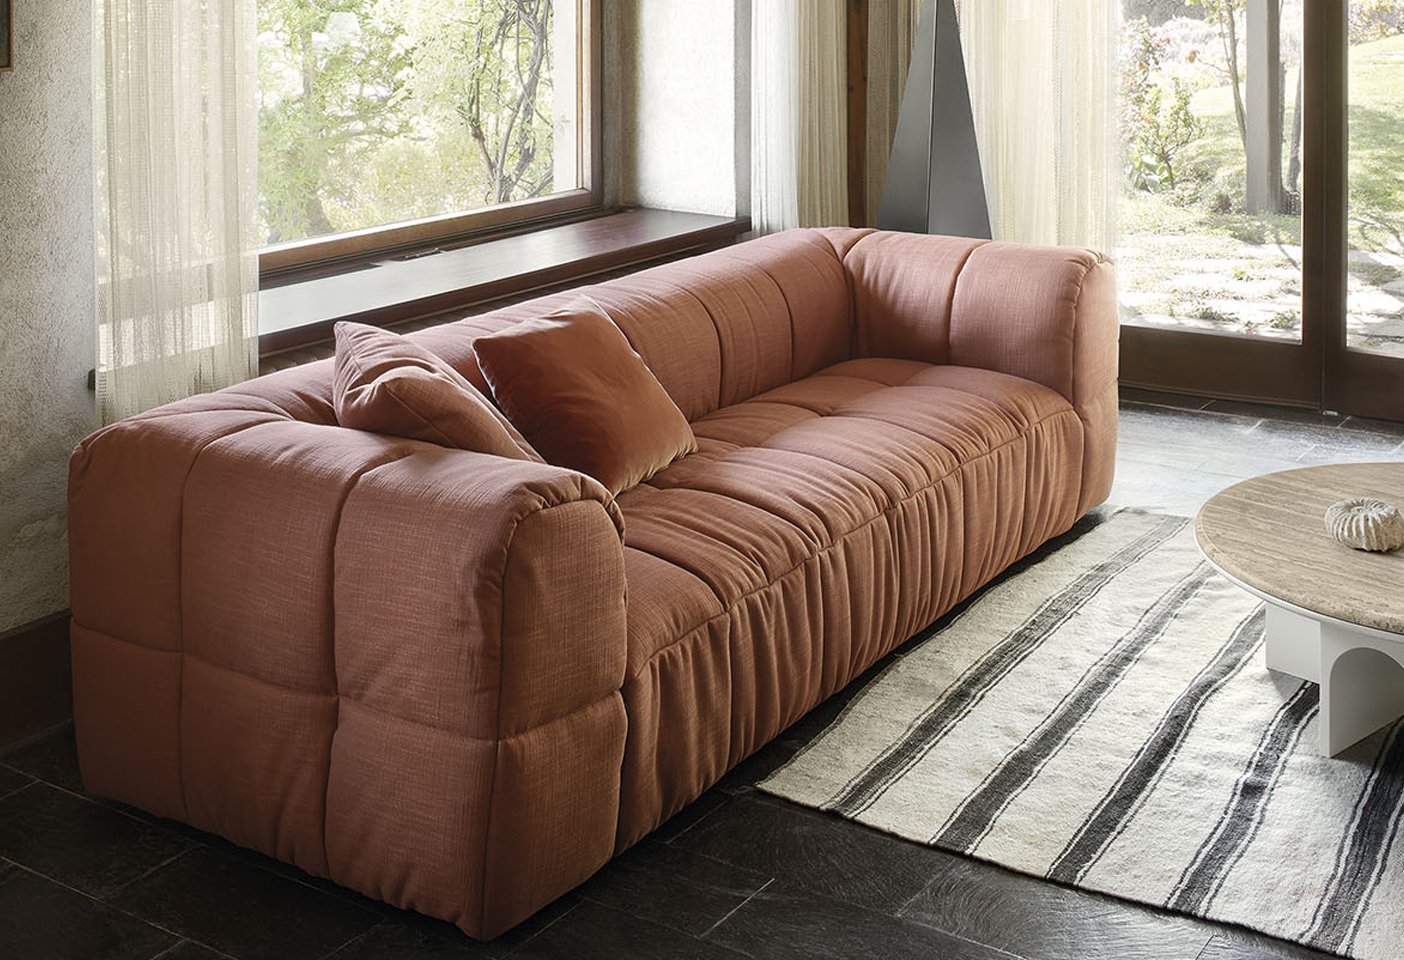 The Strips sofa designed by Italian architect Cini Boeri in 1968 was inpired by the work of artists Christo and Jeanne-Claude. Photo c/o Arflex. 